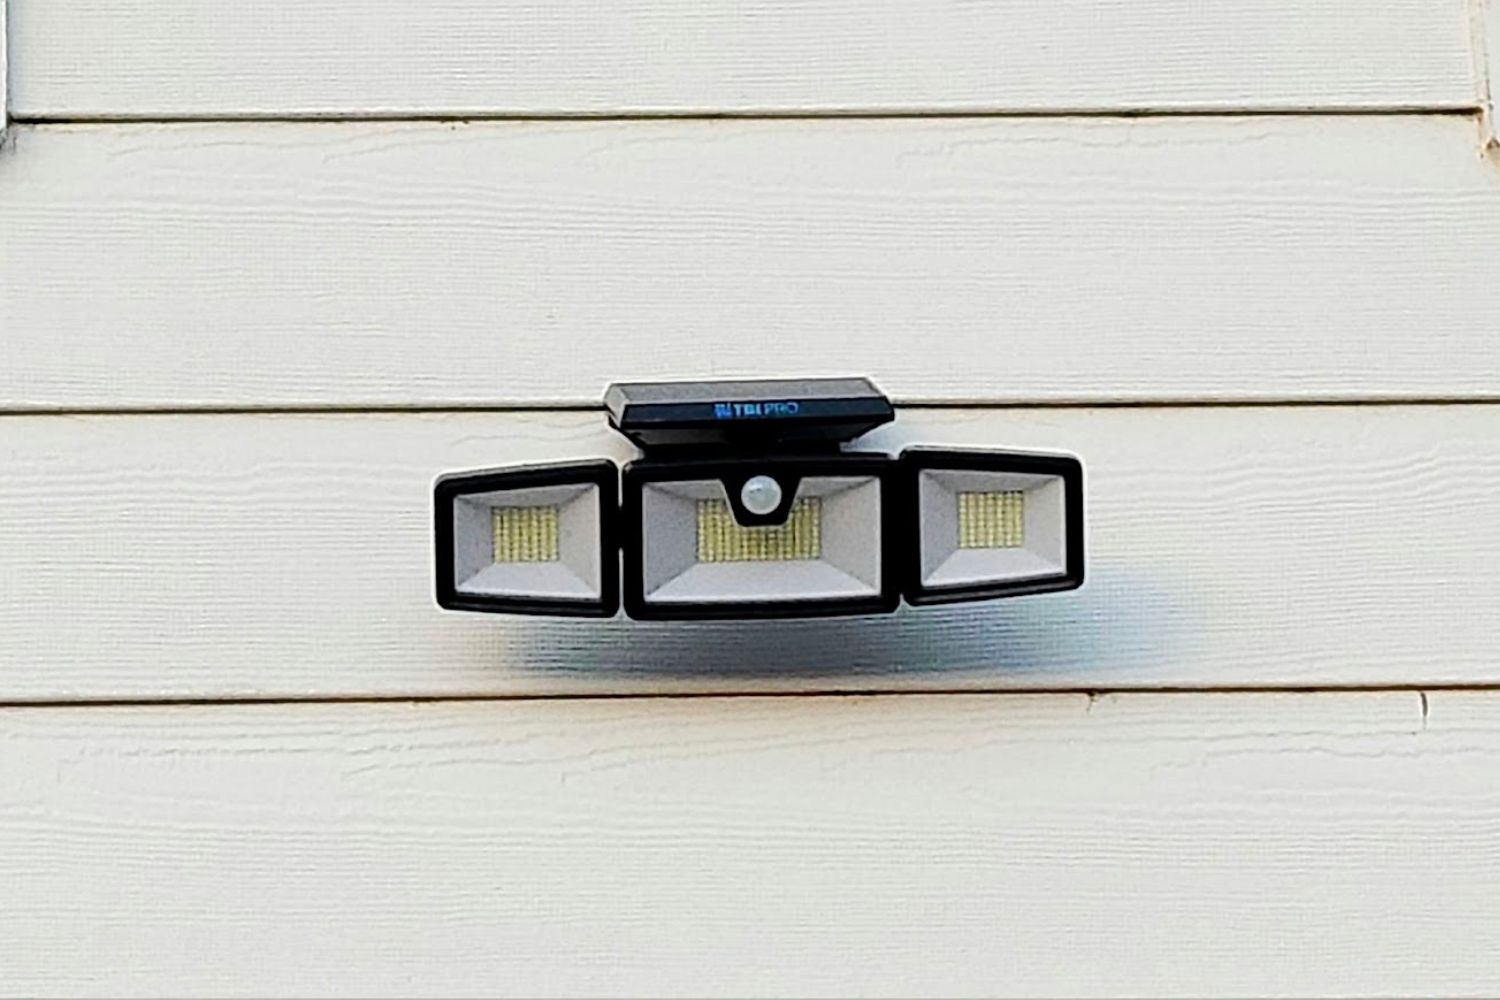 The best solar floodlight option installed on the siding of a house.